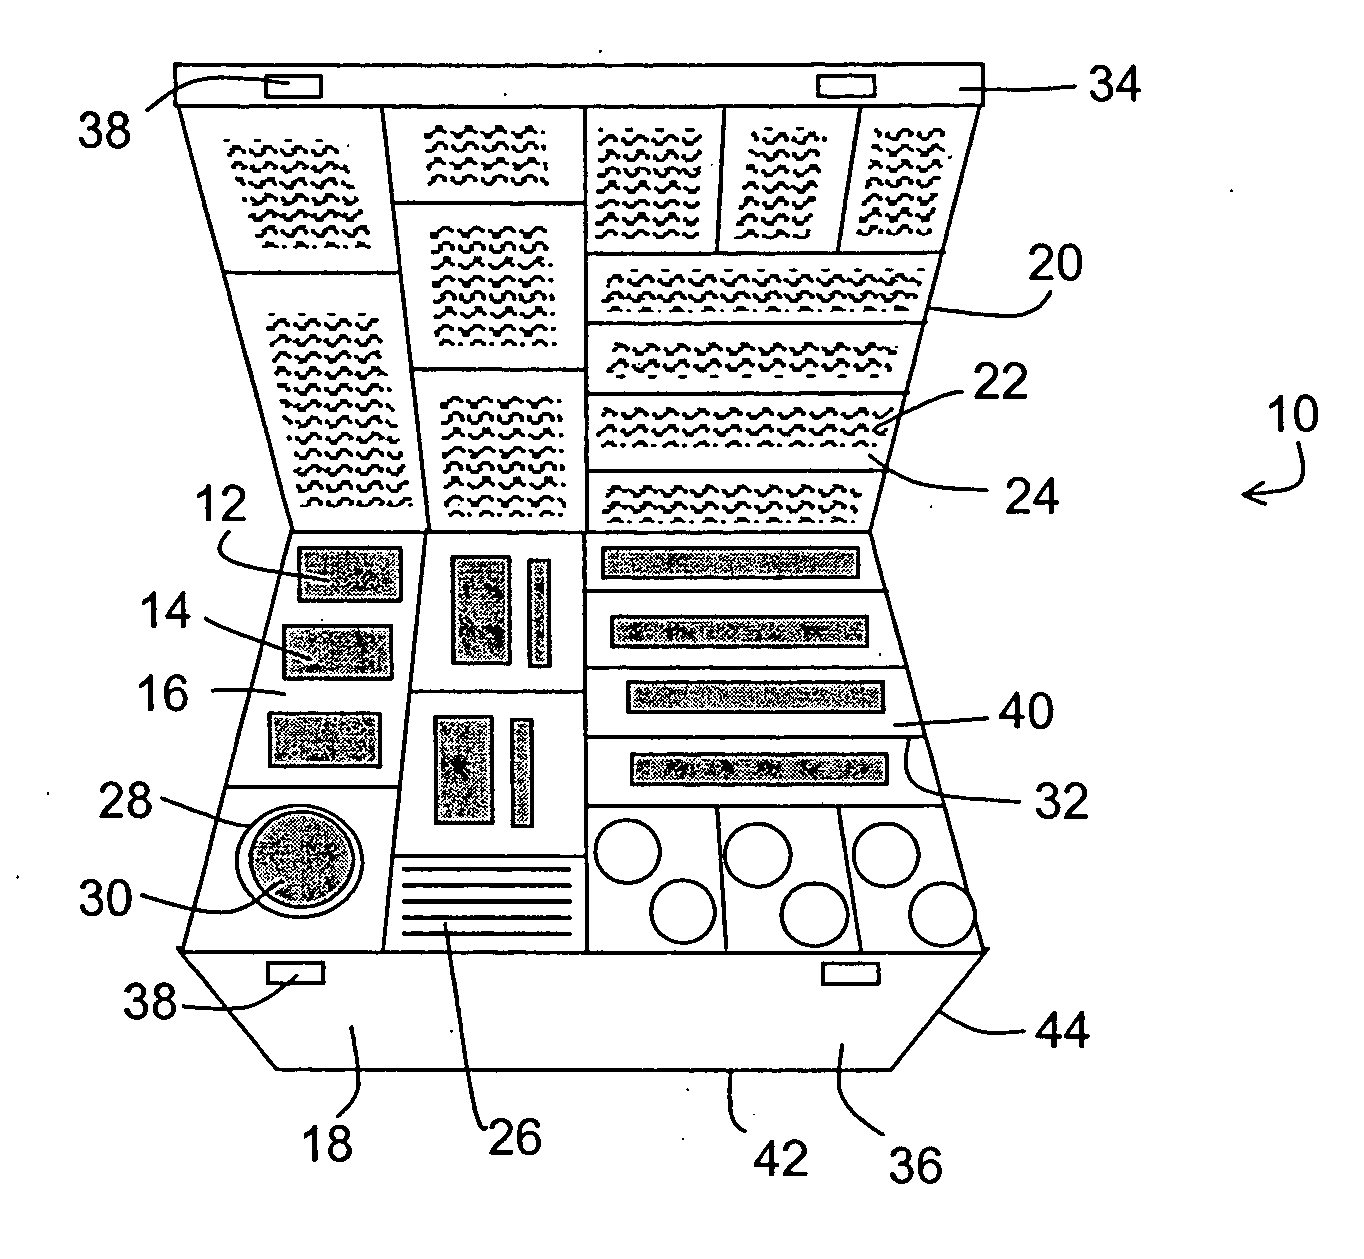 Pharmaceutical distribution device